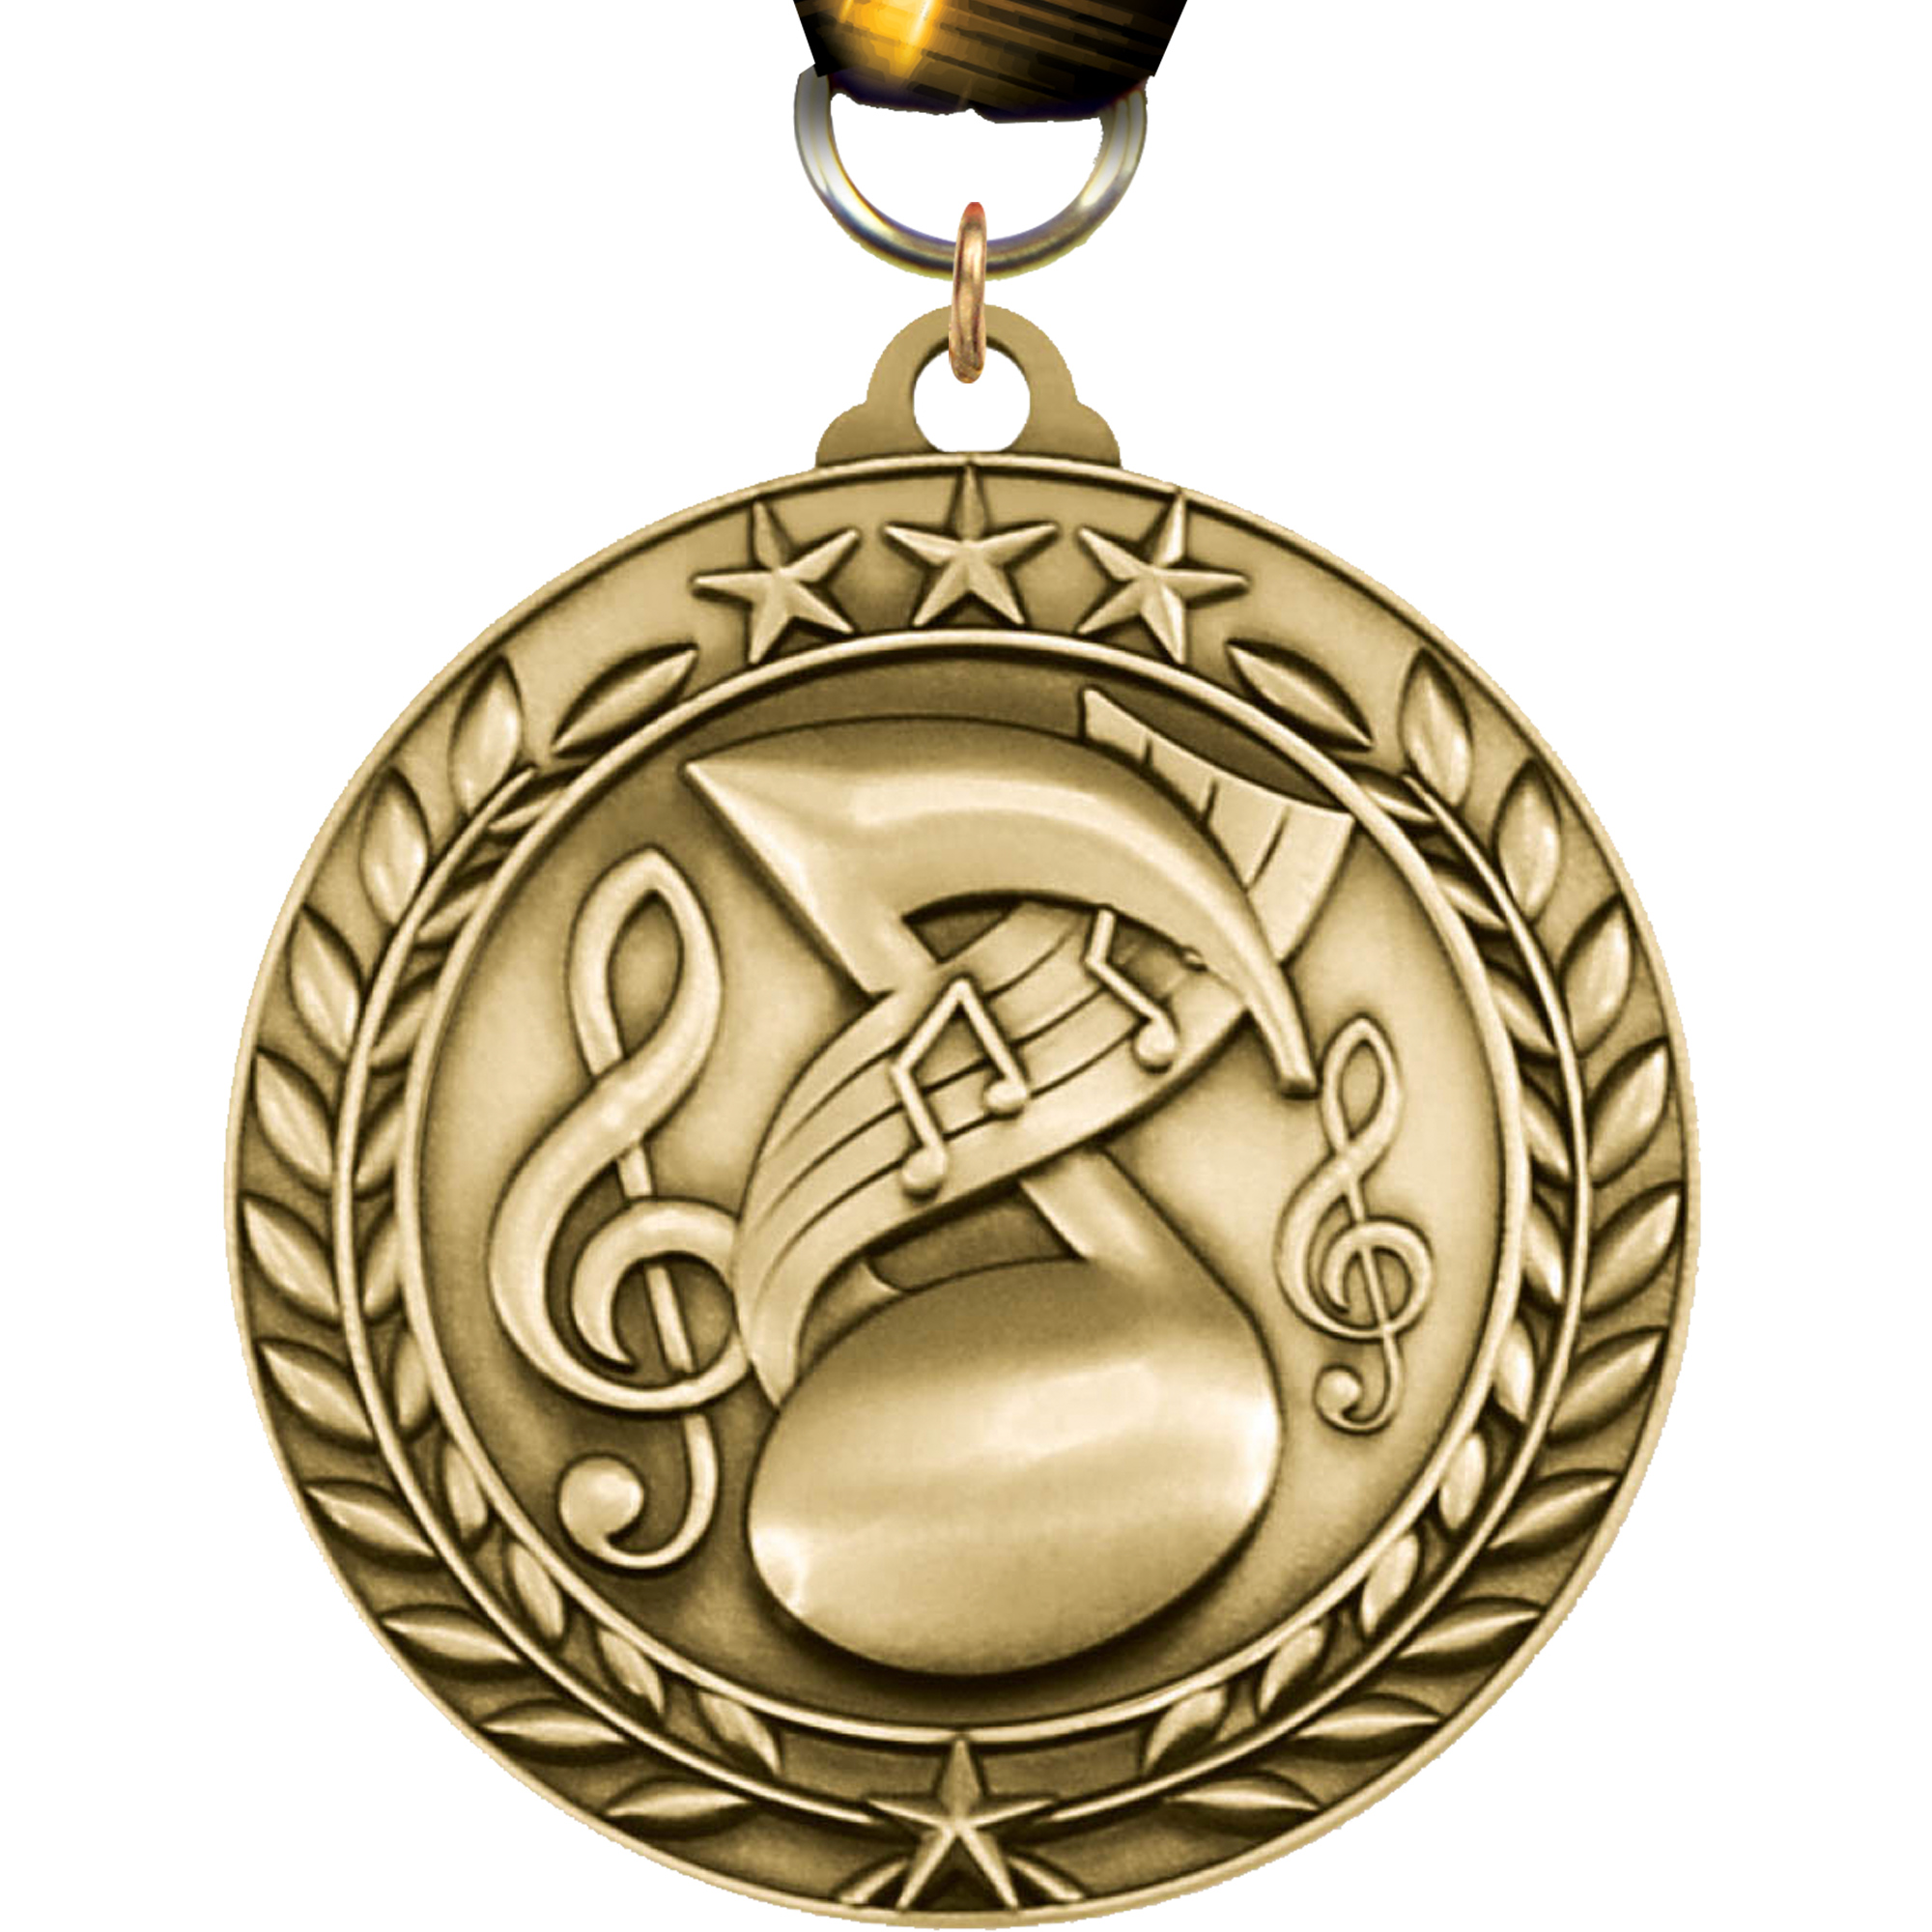 Music 1.75 inch Dimensional Medal